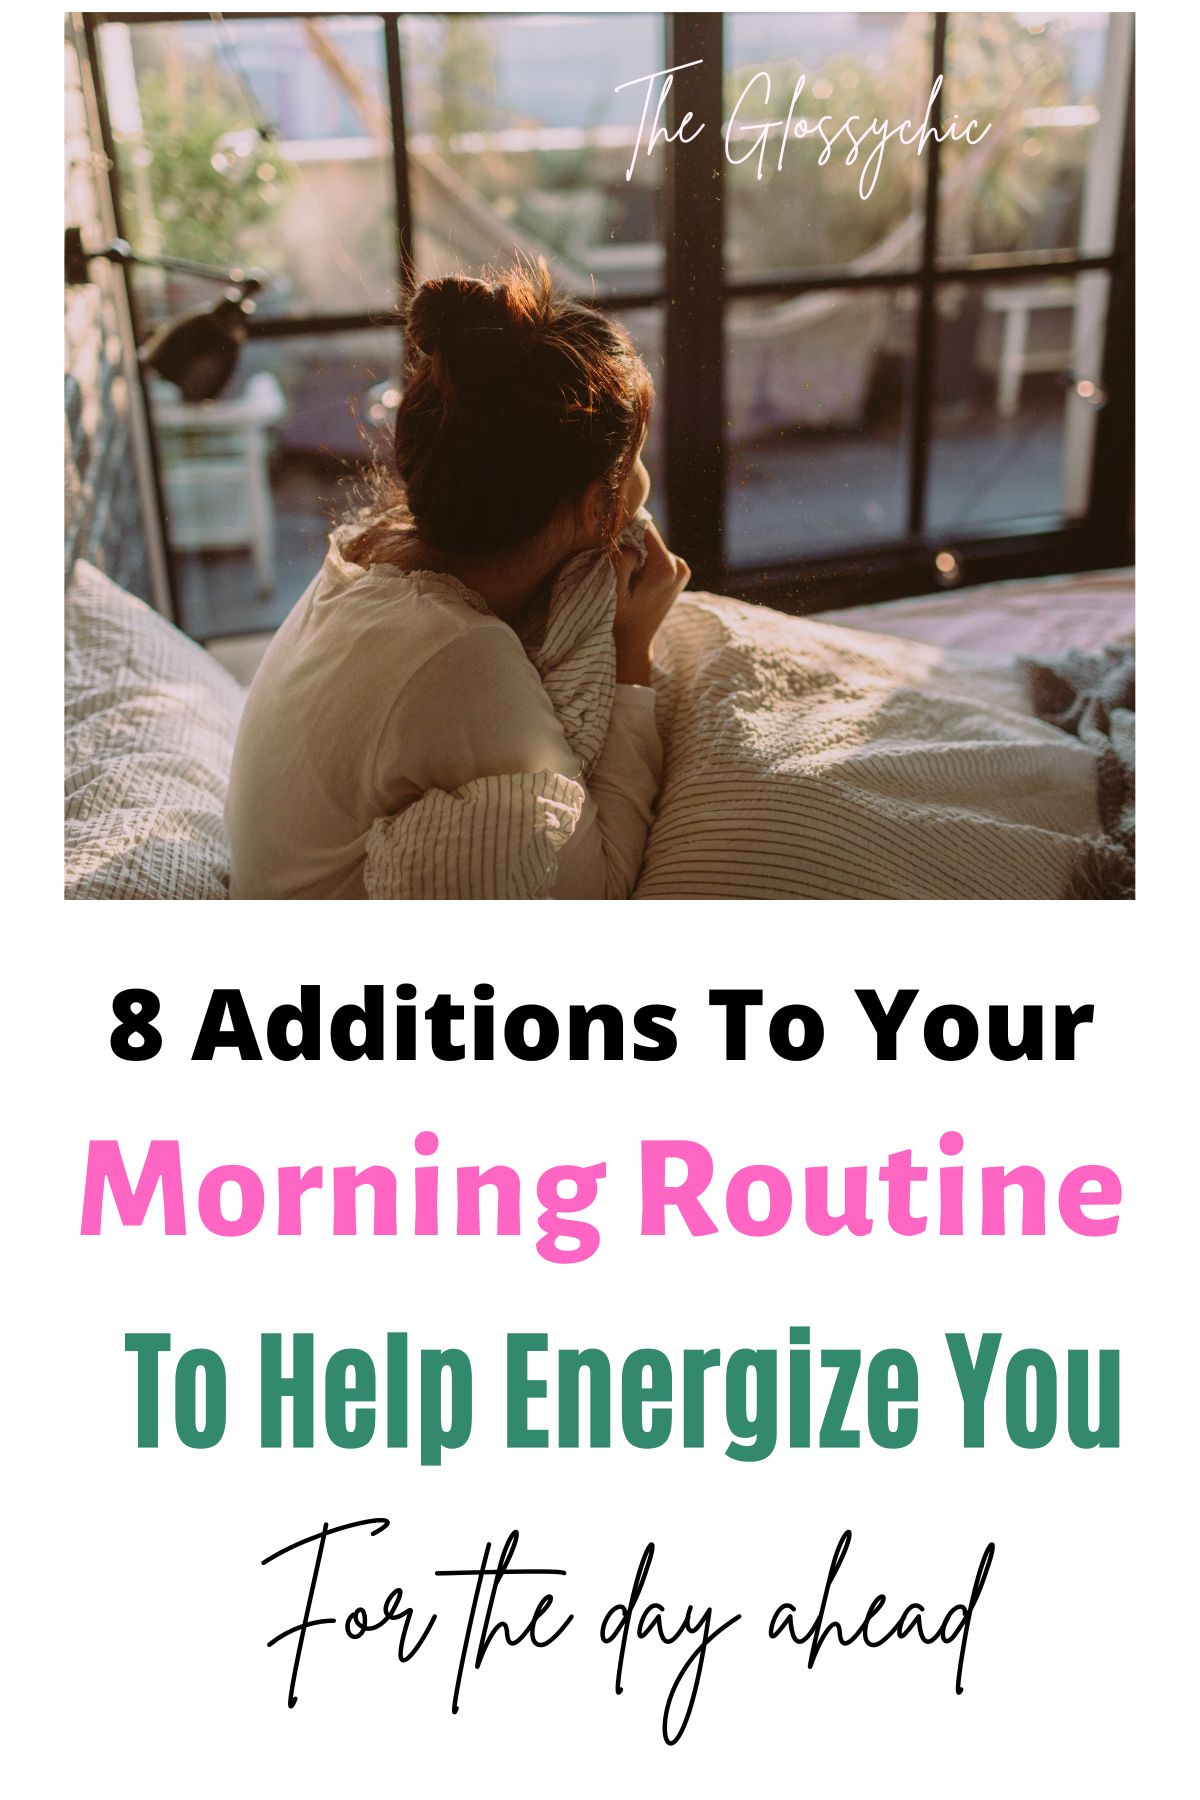 8 Additions To Your Morning Routine To Help Energize You For The Day Ahead